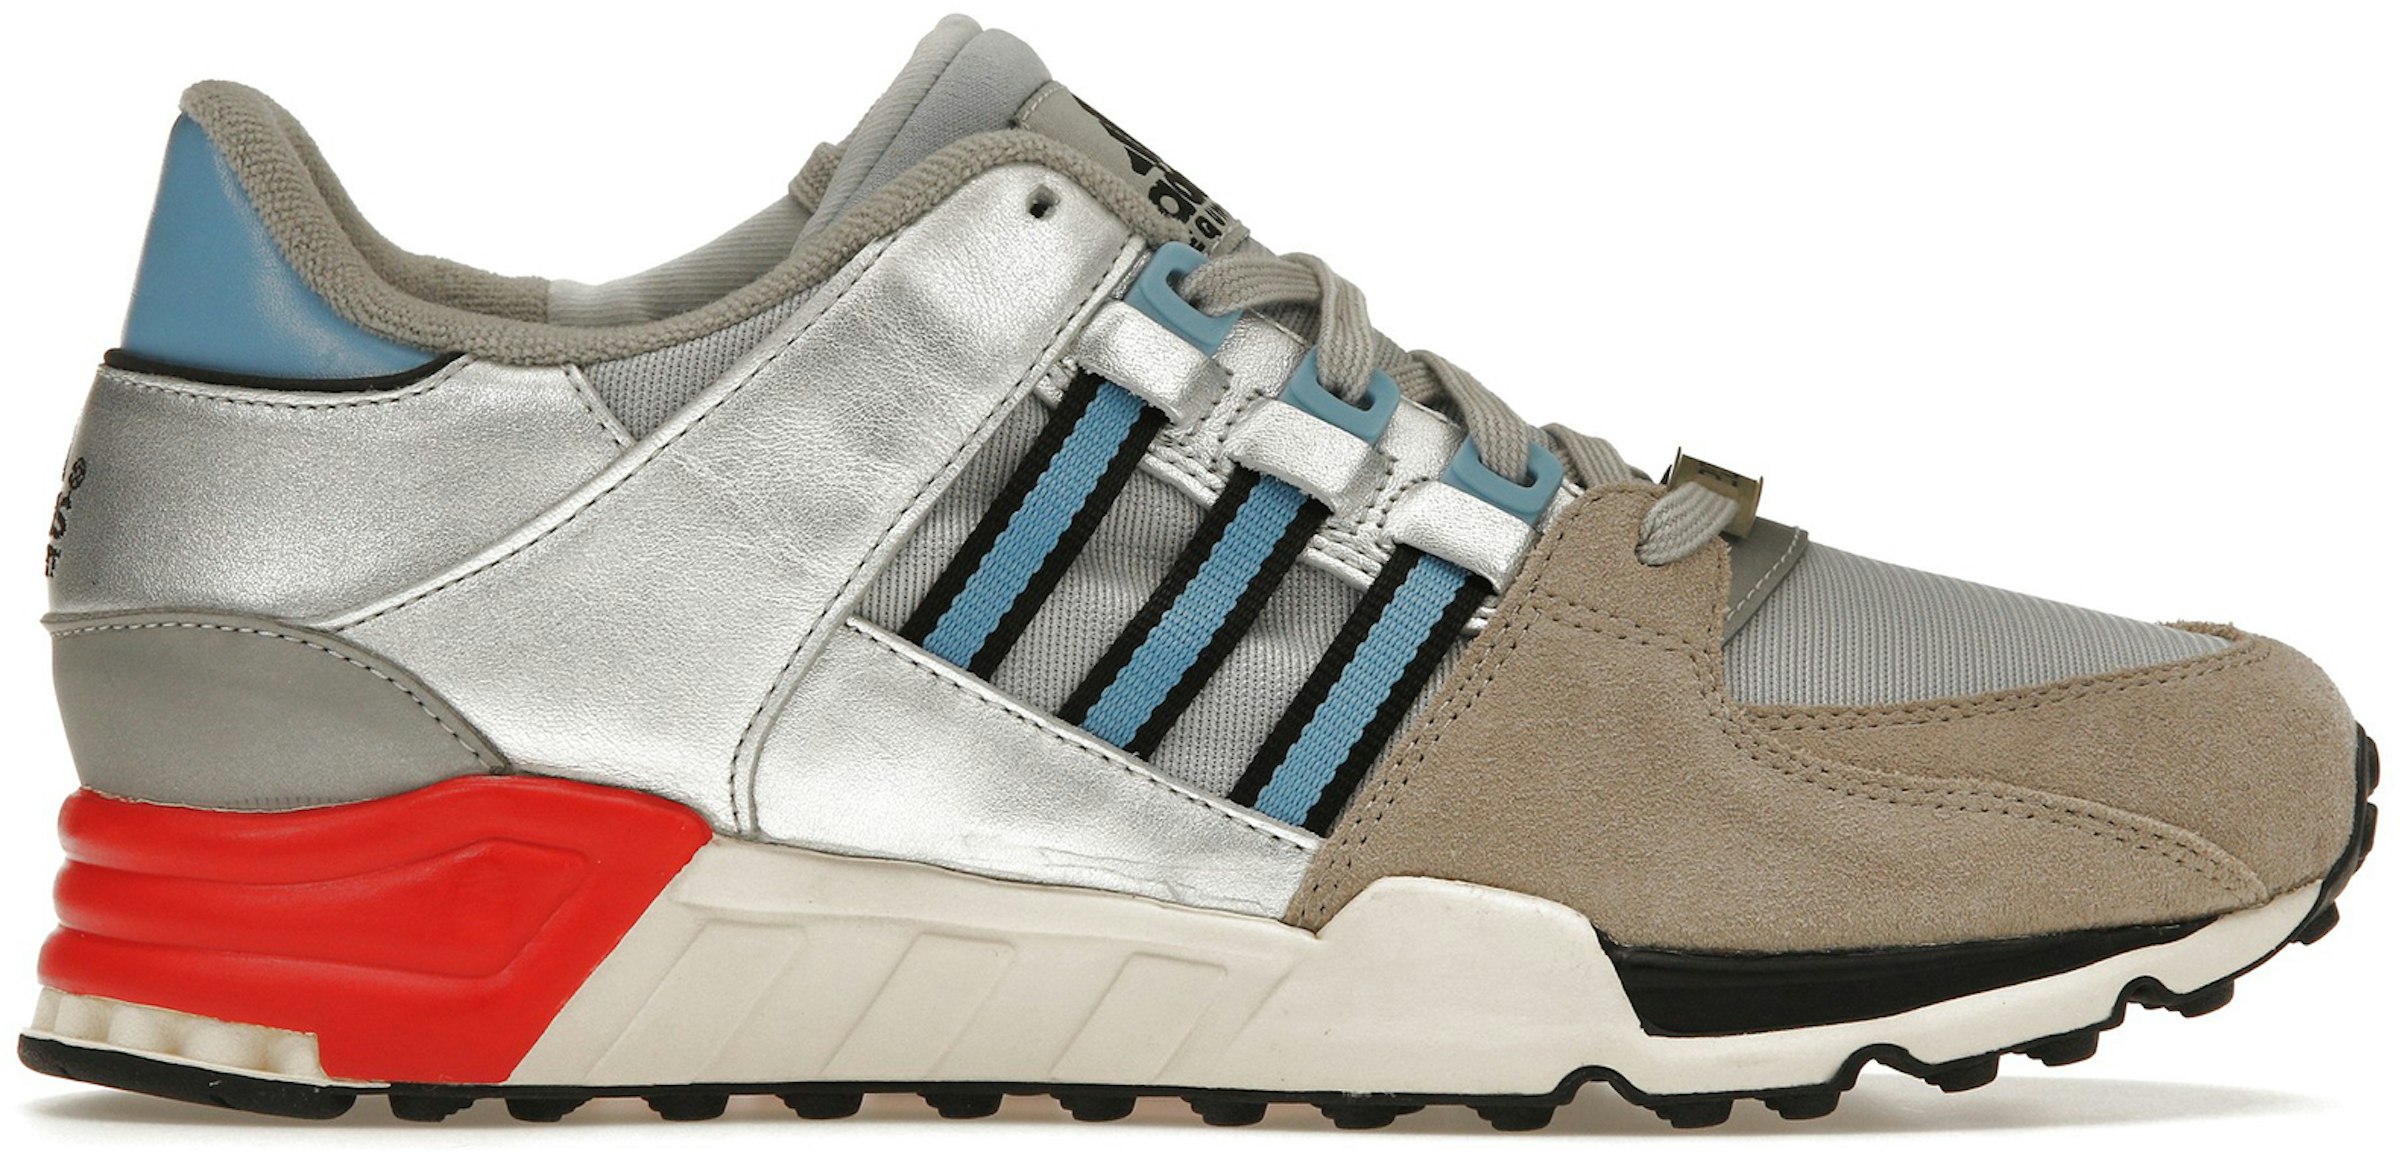 EQT Support 93 Packer Shoes Micropacer Men's - C77363 US